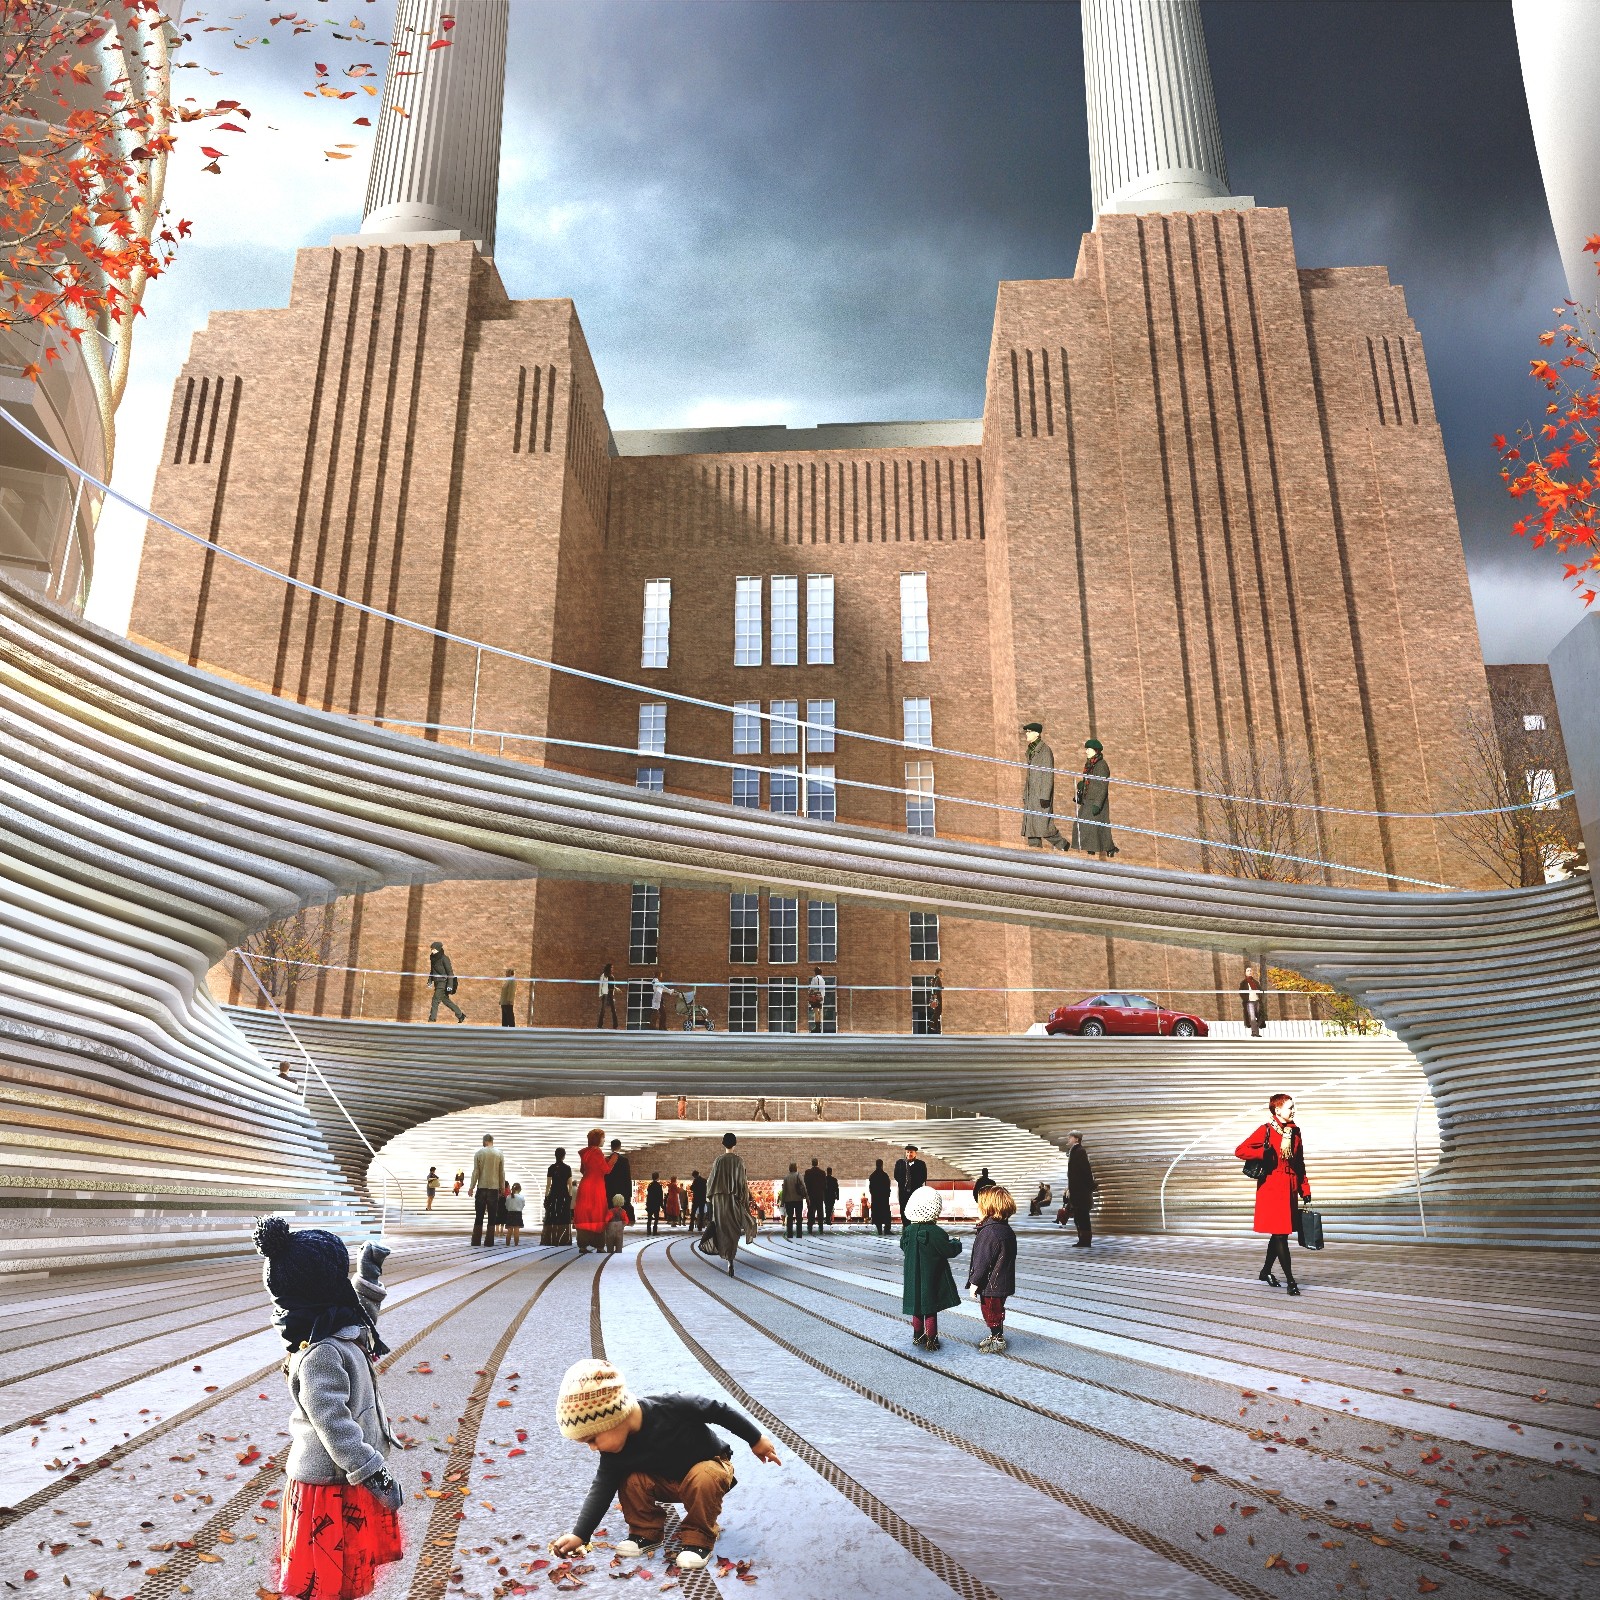 A civic square designed by BIG in Battersea Courtesy of Battersea Power Station Development Company